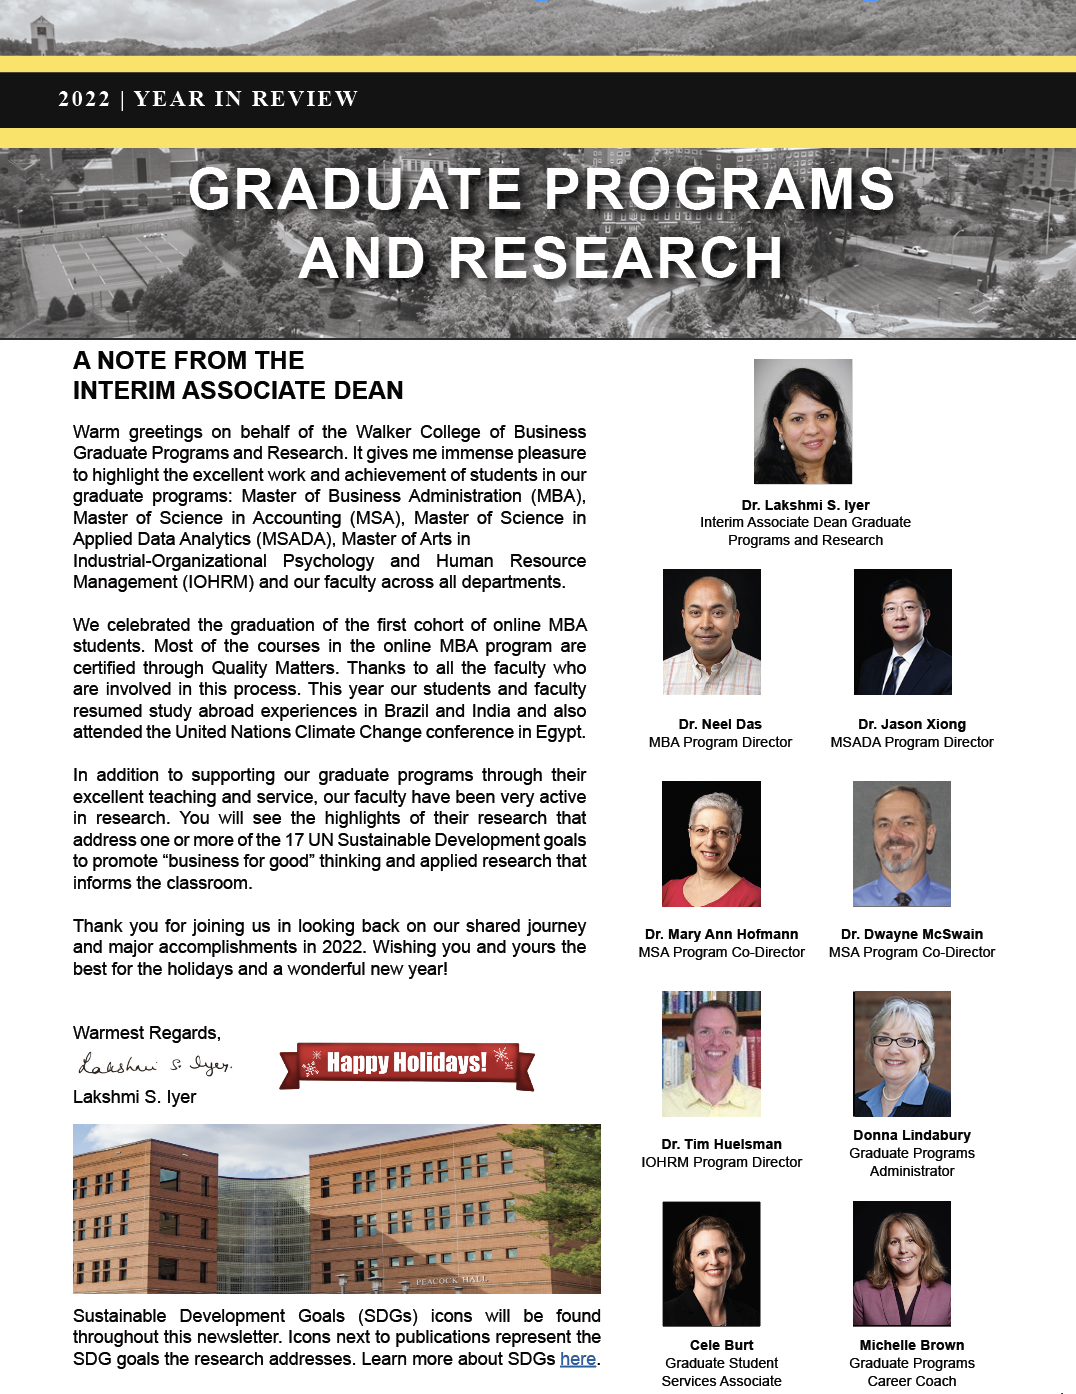 2022 Year in Review: WCOB Graduate Programs and Research